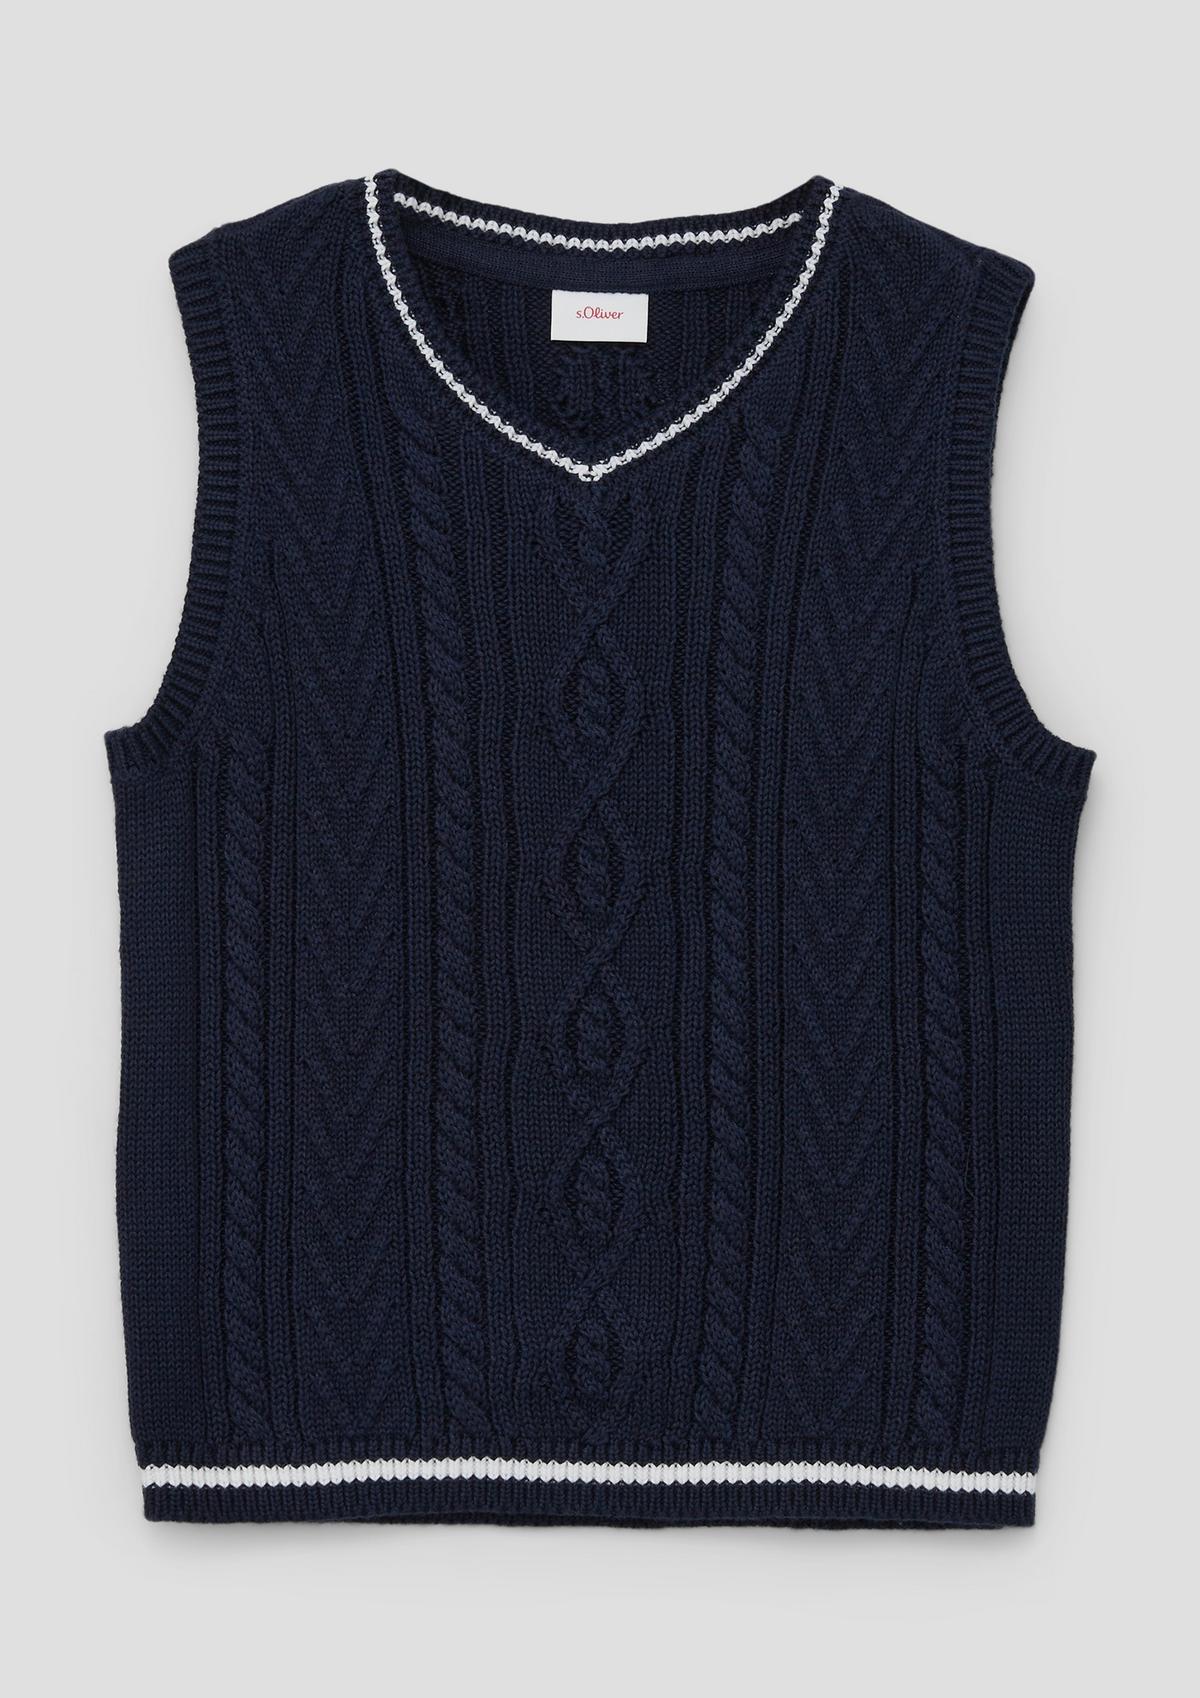 online for boys knitwear and Sweatshirts